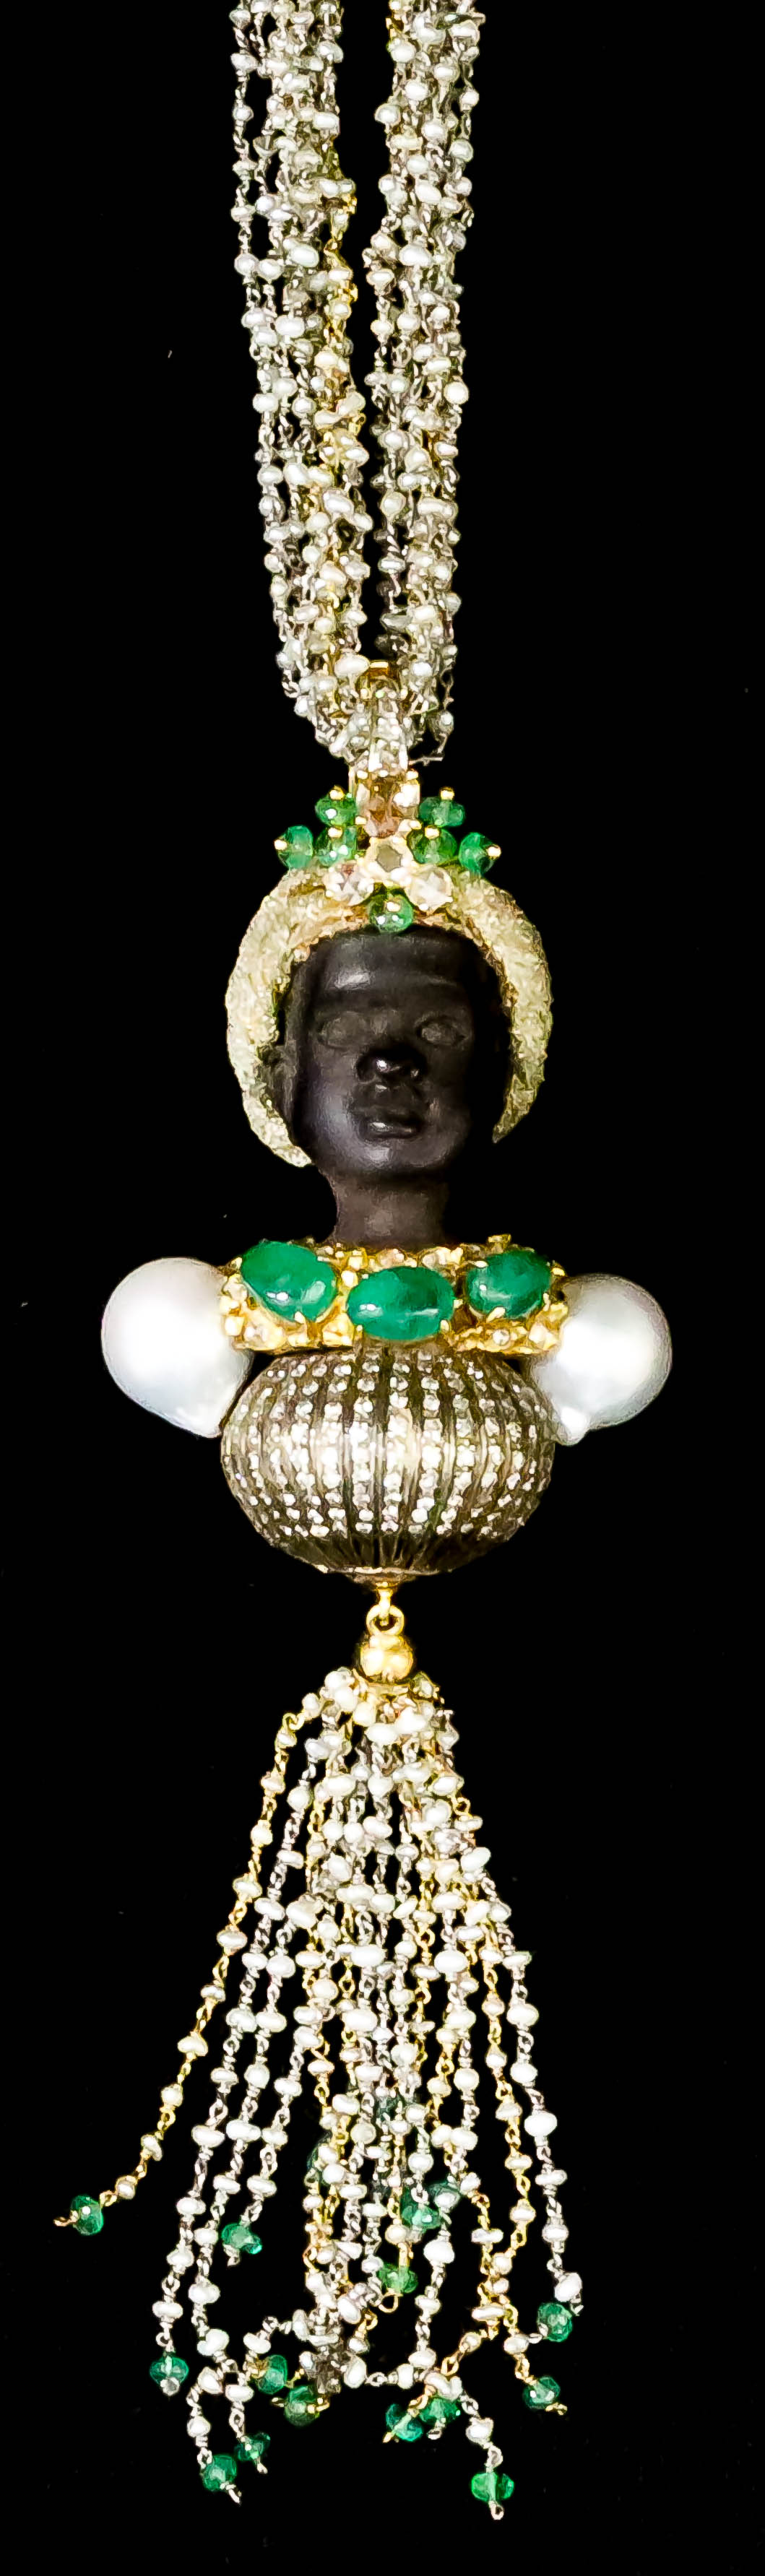 A Carved Wood, Gold, Emerald, Diamond and Pearl "Blackamoor" Pendant, set with emeralds, approximate